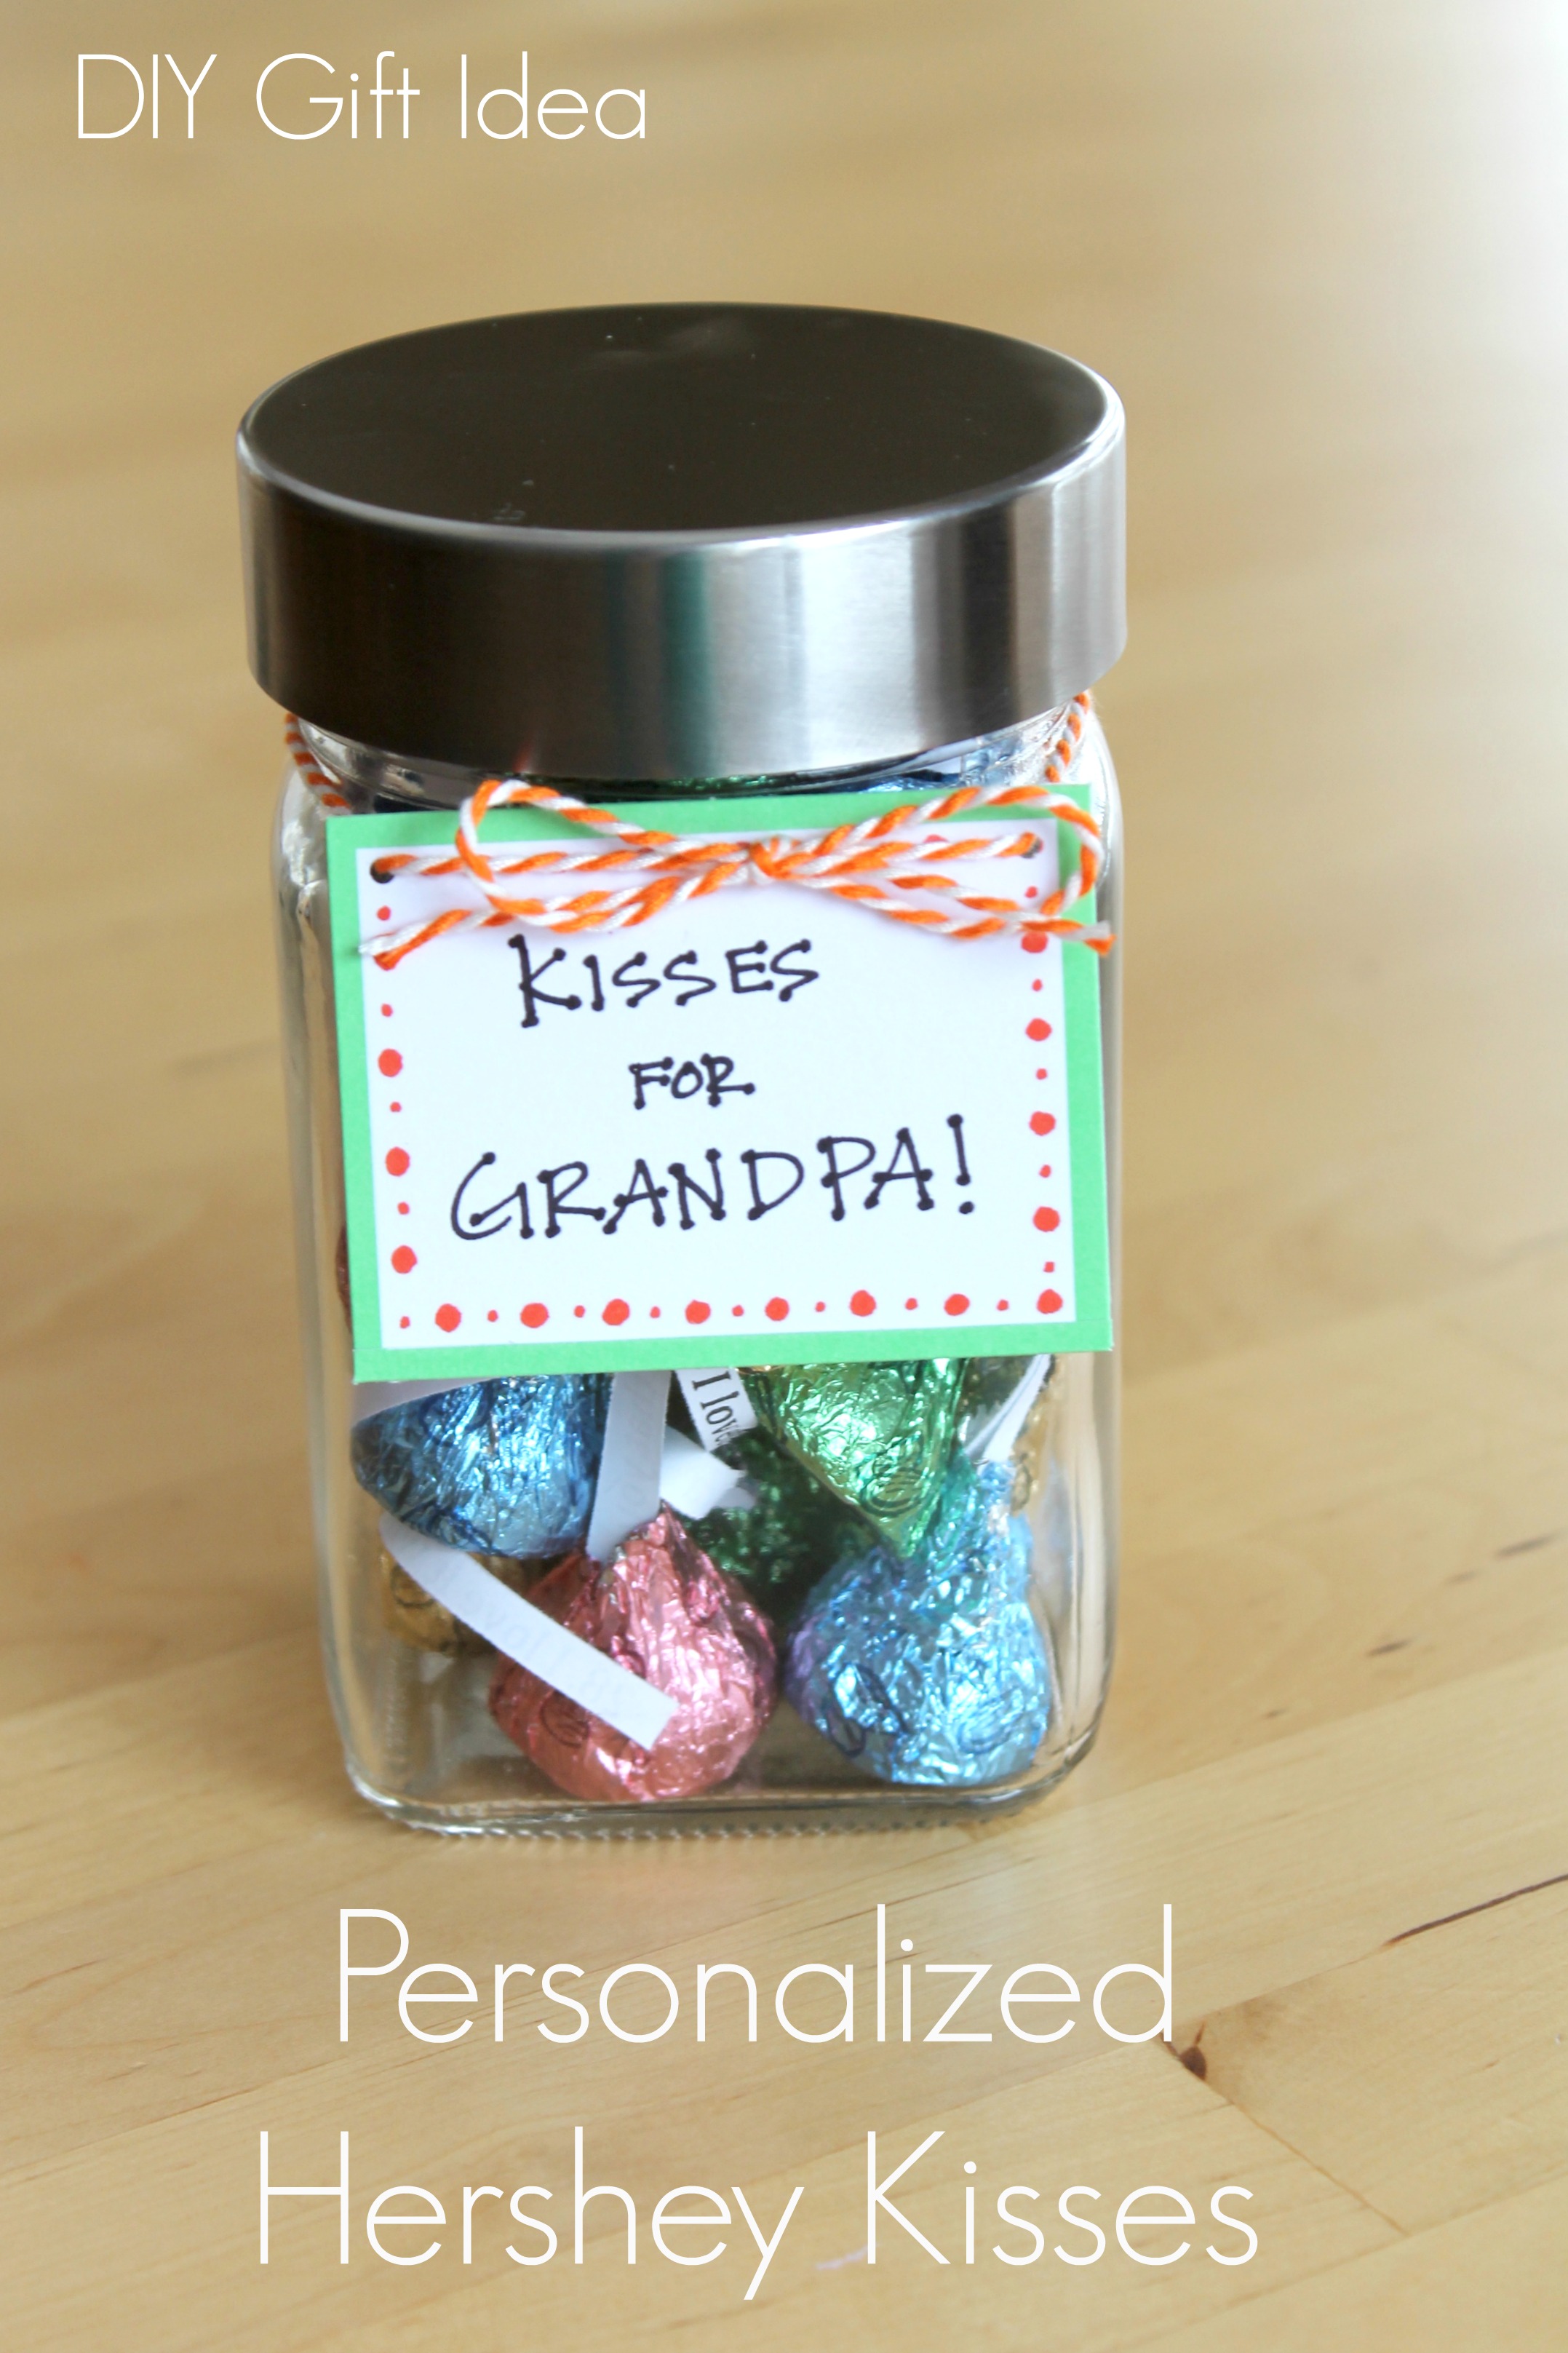 How do I love thee? Let me count the ways! Unwrap Hershey Kisses and replace the paper with a personalized little note. Fill an entire jar with all the reasons you love them. It is the perfect gift for Valentine's Day, Mother's Day or Father's Day.